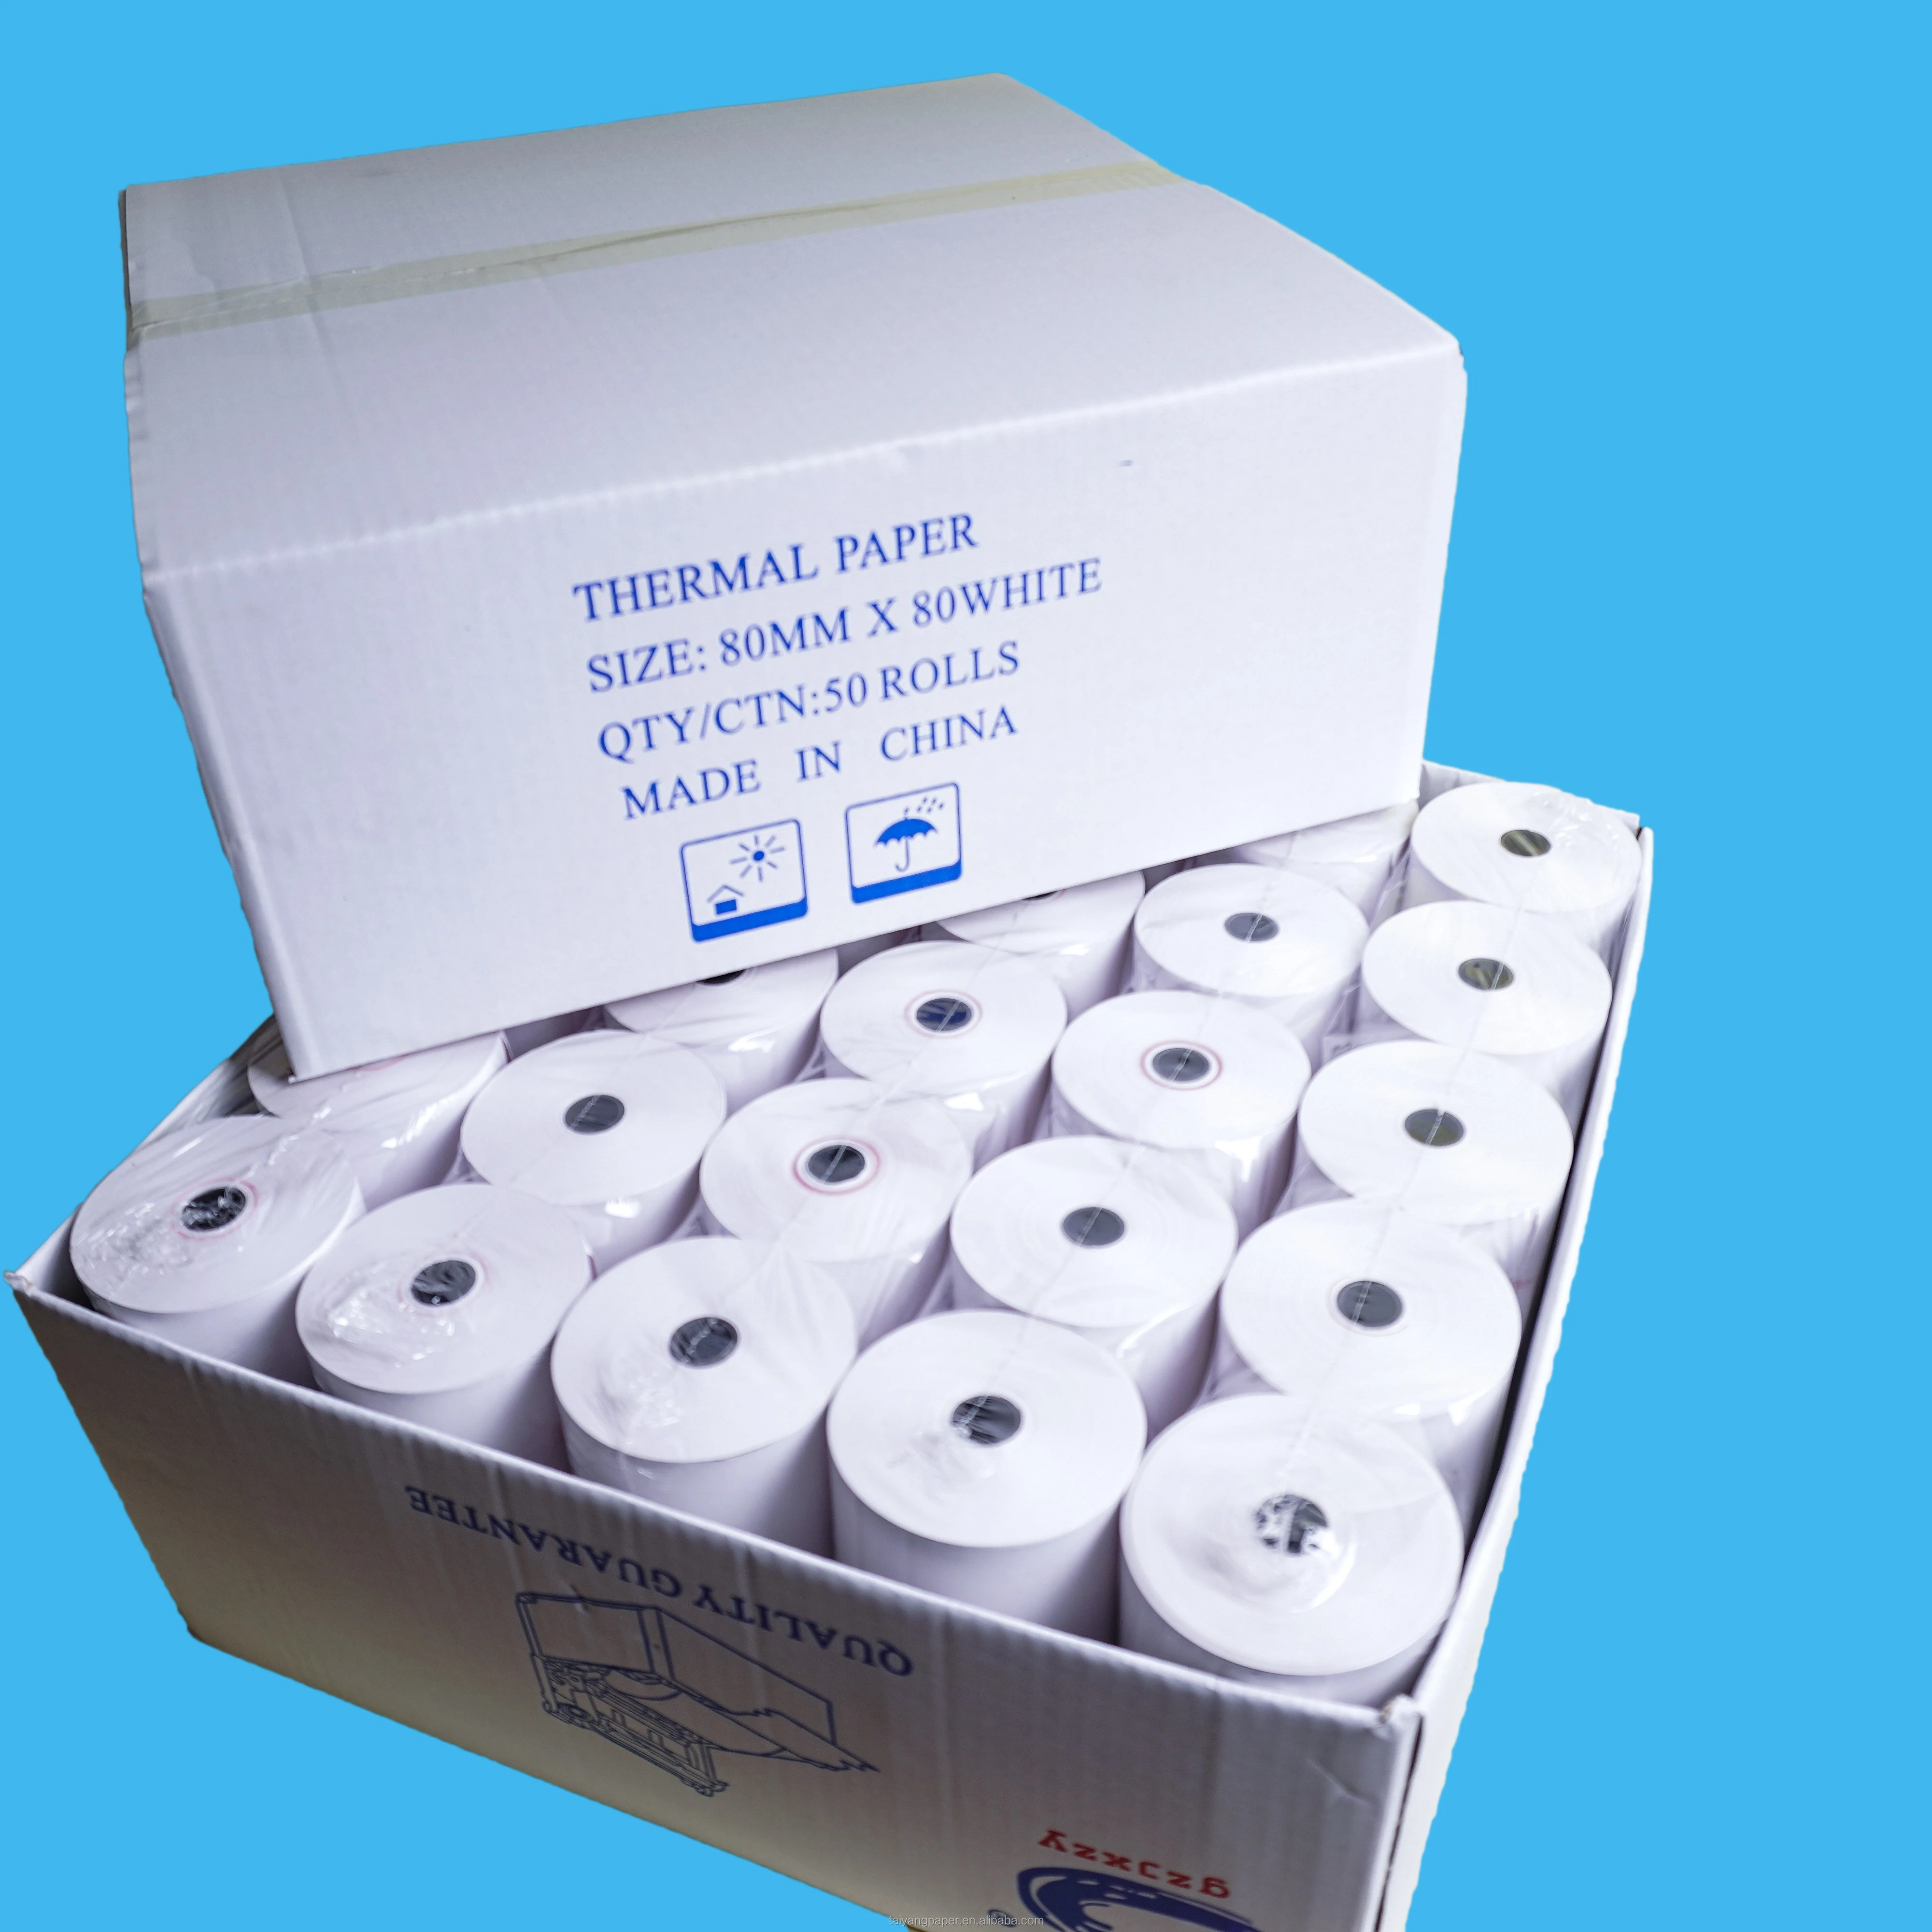 Factory hot sale wcdma pos thermal paper roll 80mm Made In China Low Price